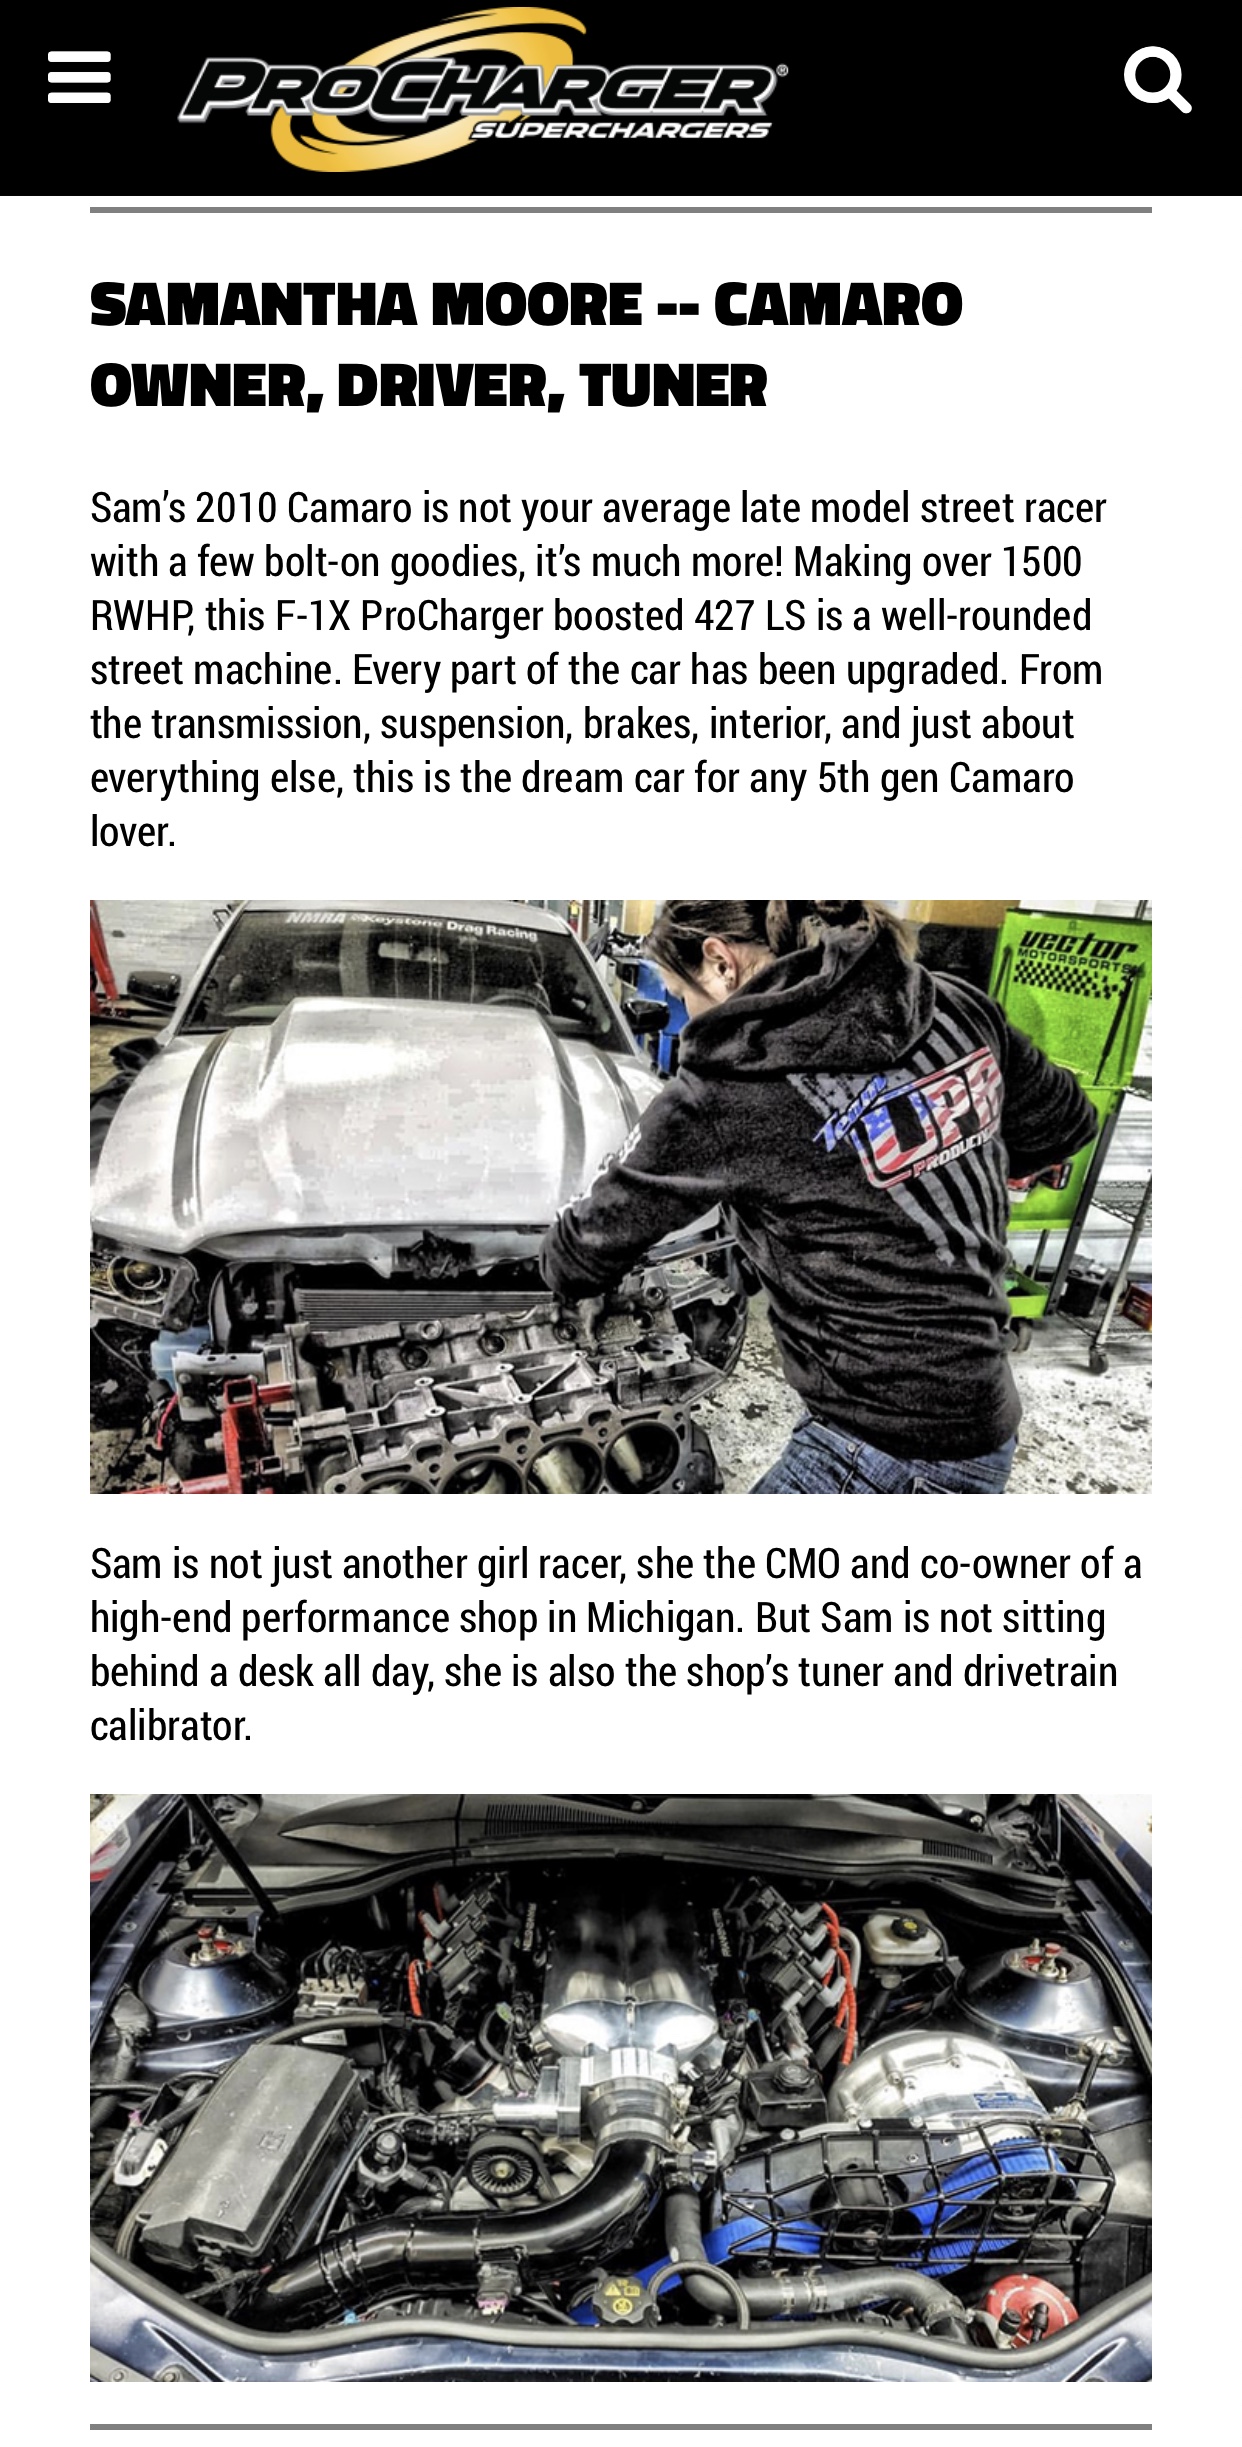 Team VMS Member featured in Procharger’s Article “PROCHARGED FEMALE RACERS DRIVING STRAIGHT TO THE WINNERS CIRCLE!”